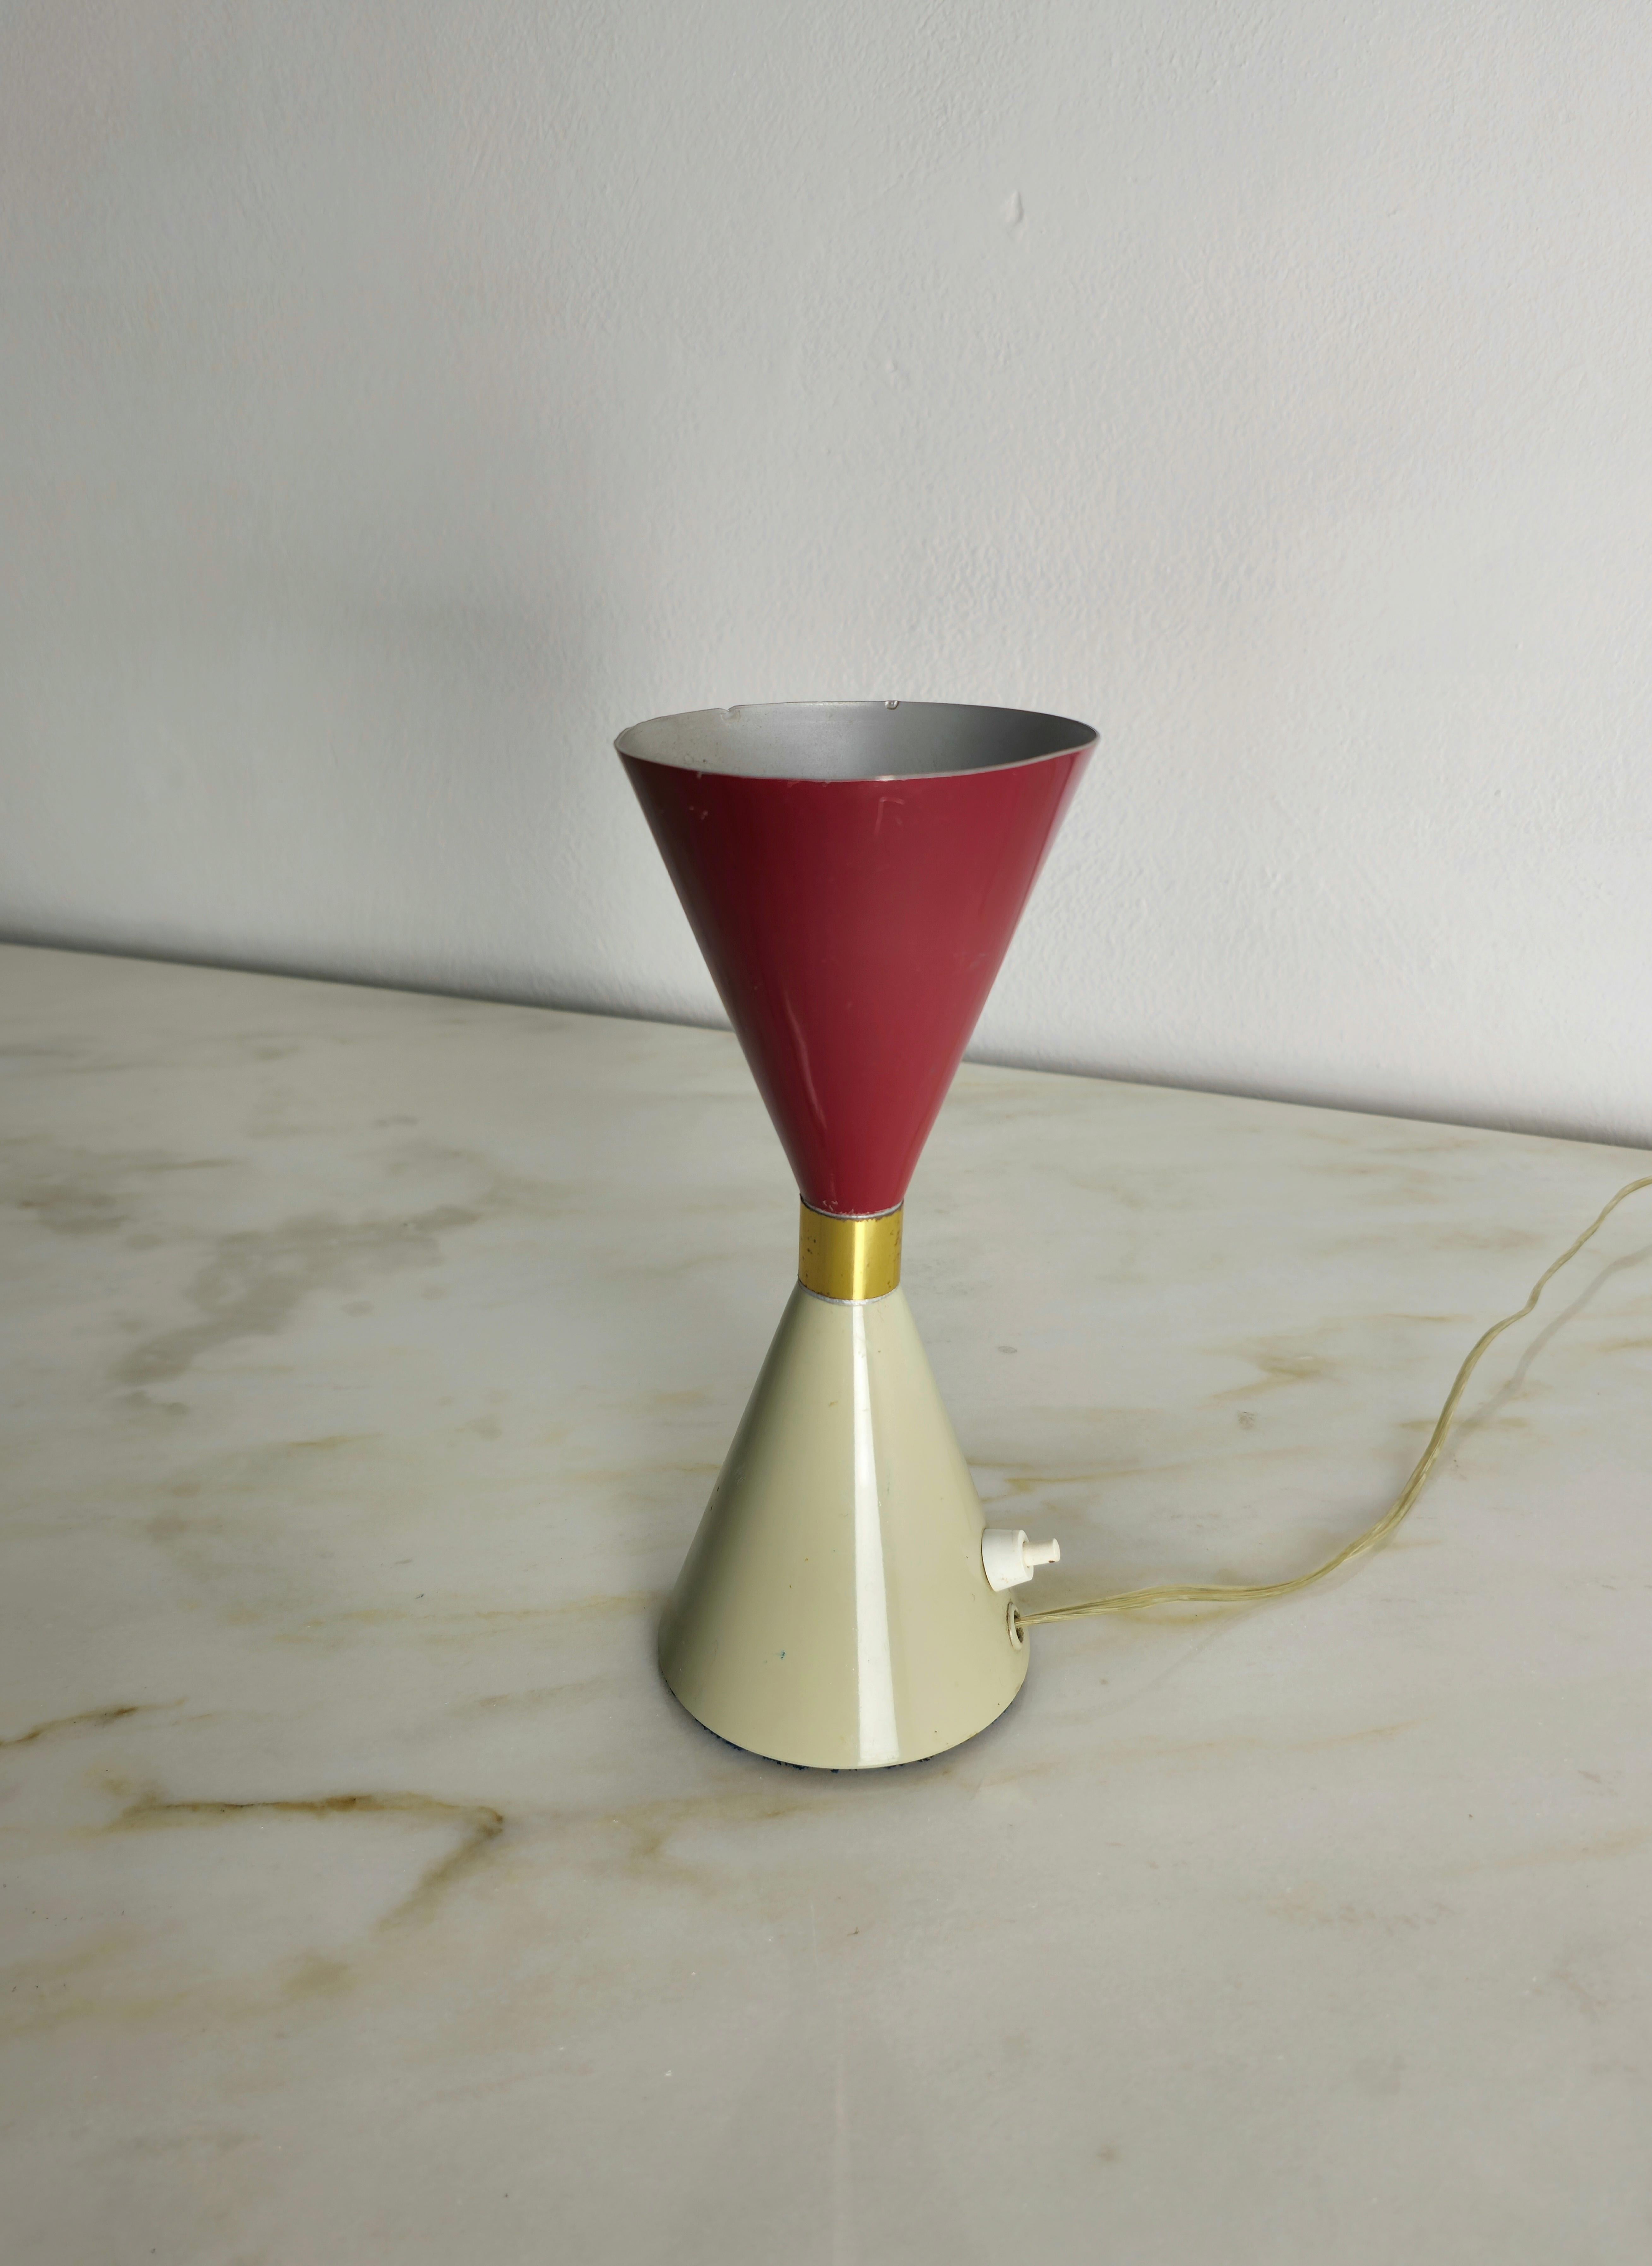 Italian Table Lamp Aluminum Red Grey in the Style of Arredoluce Midcentury, Italy, 1950s For Sale